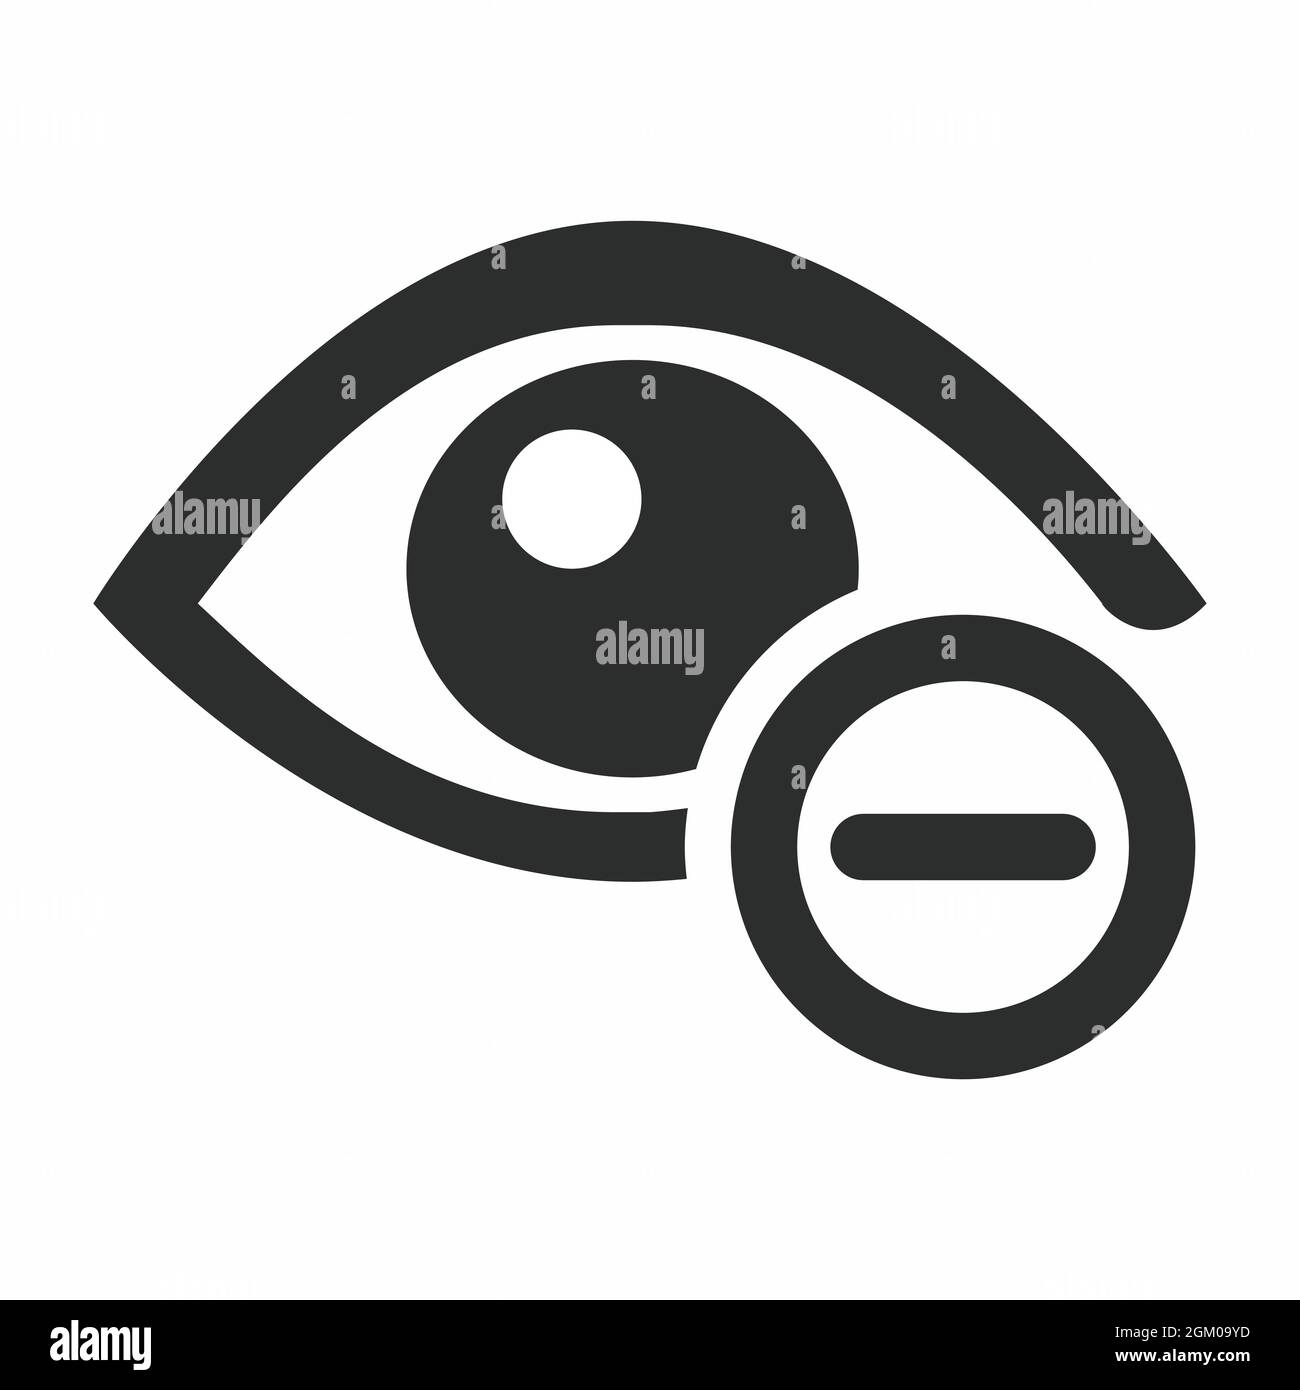 Icon Vector of Eye Exam 3 - Glyph Style - Simple illustration, Editable stroke, Design template vector, Good for prints, posters, advertisements, anno Stock Vector